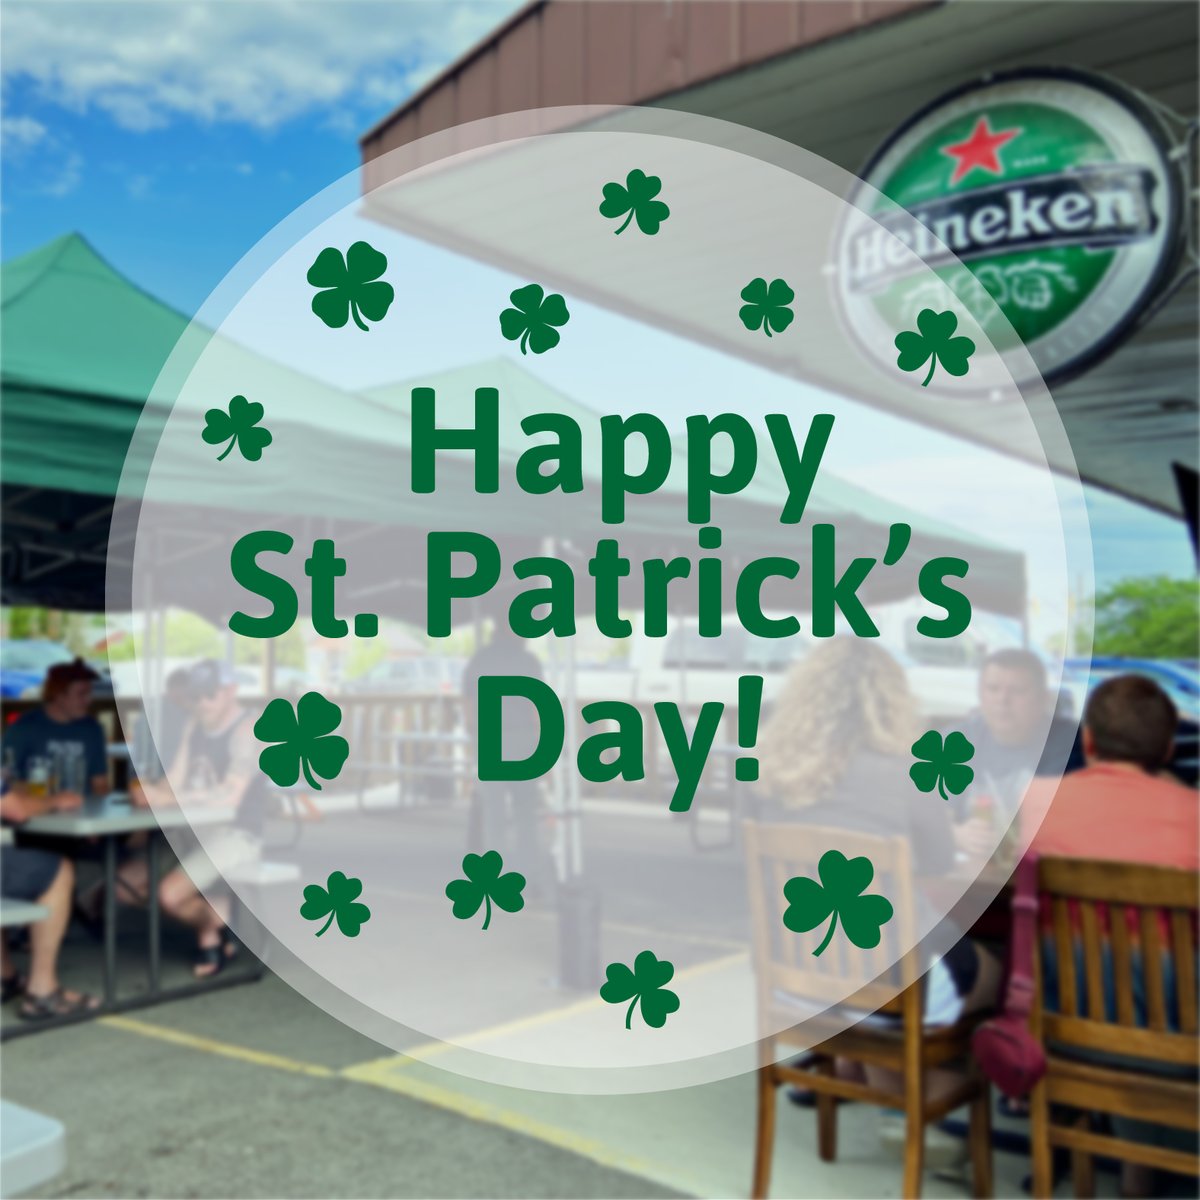 'May the roof above us never fall in, and the friends beneath it never fall out.' - An Irish blessing that will surely hold true to our customers on St Patty's!

#gazebo #shelter #instantshelter #popuptent #beertent #beer #stpatricksday #irish #lucky #branding #eventbranding